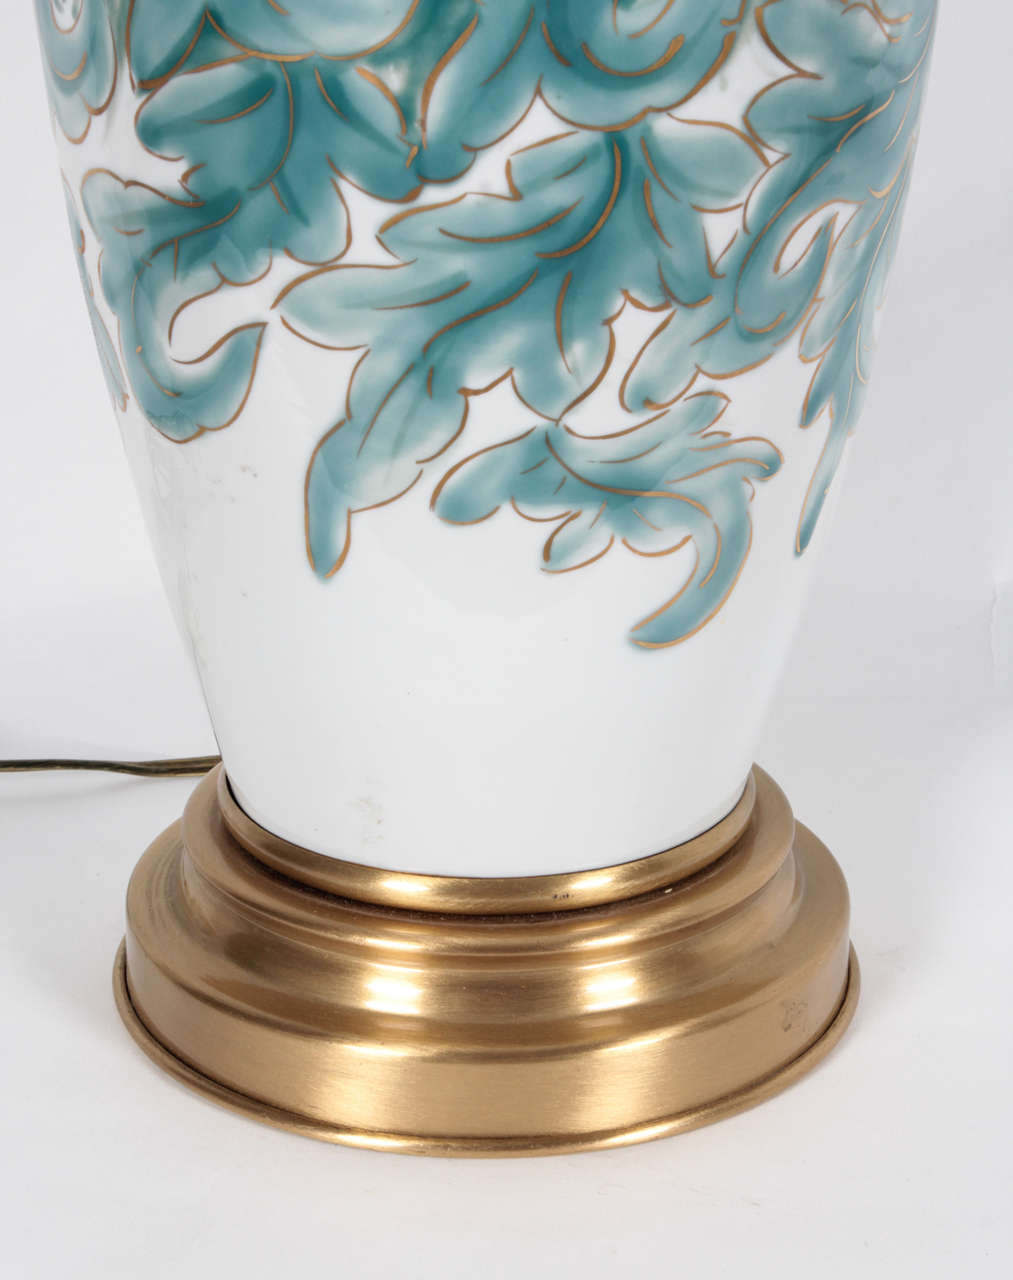 Important French Porcelain Lamp by Camille Tharaud In Excellent Condition For Sale In New York, NY